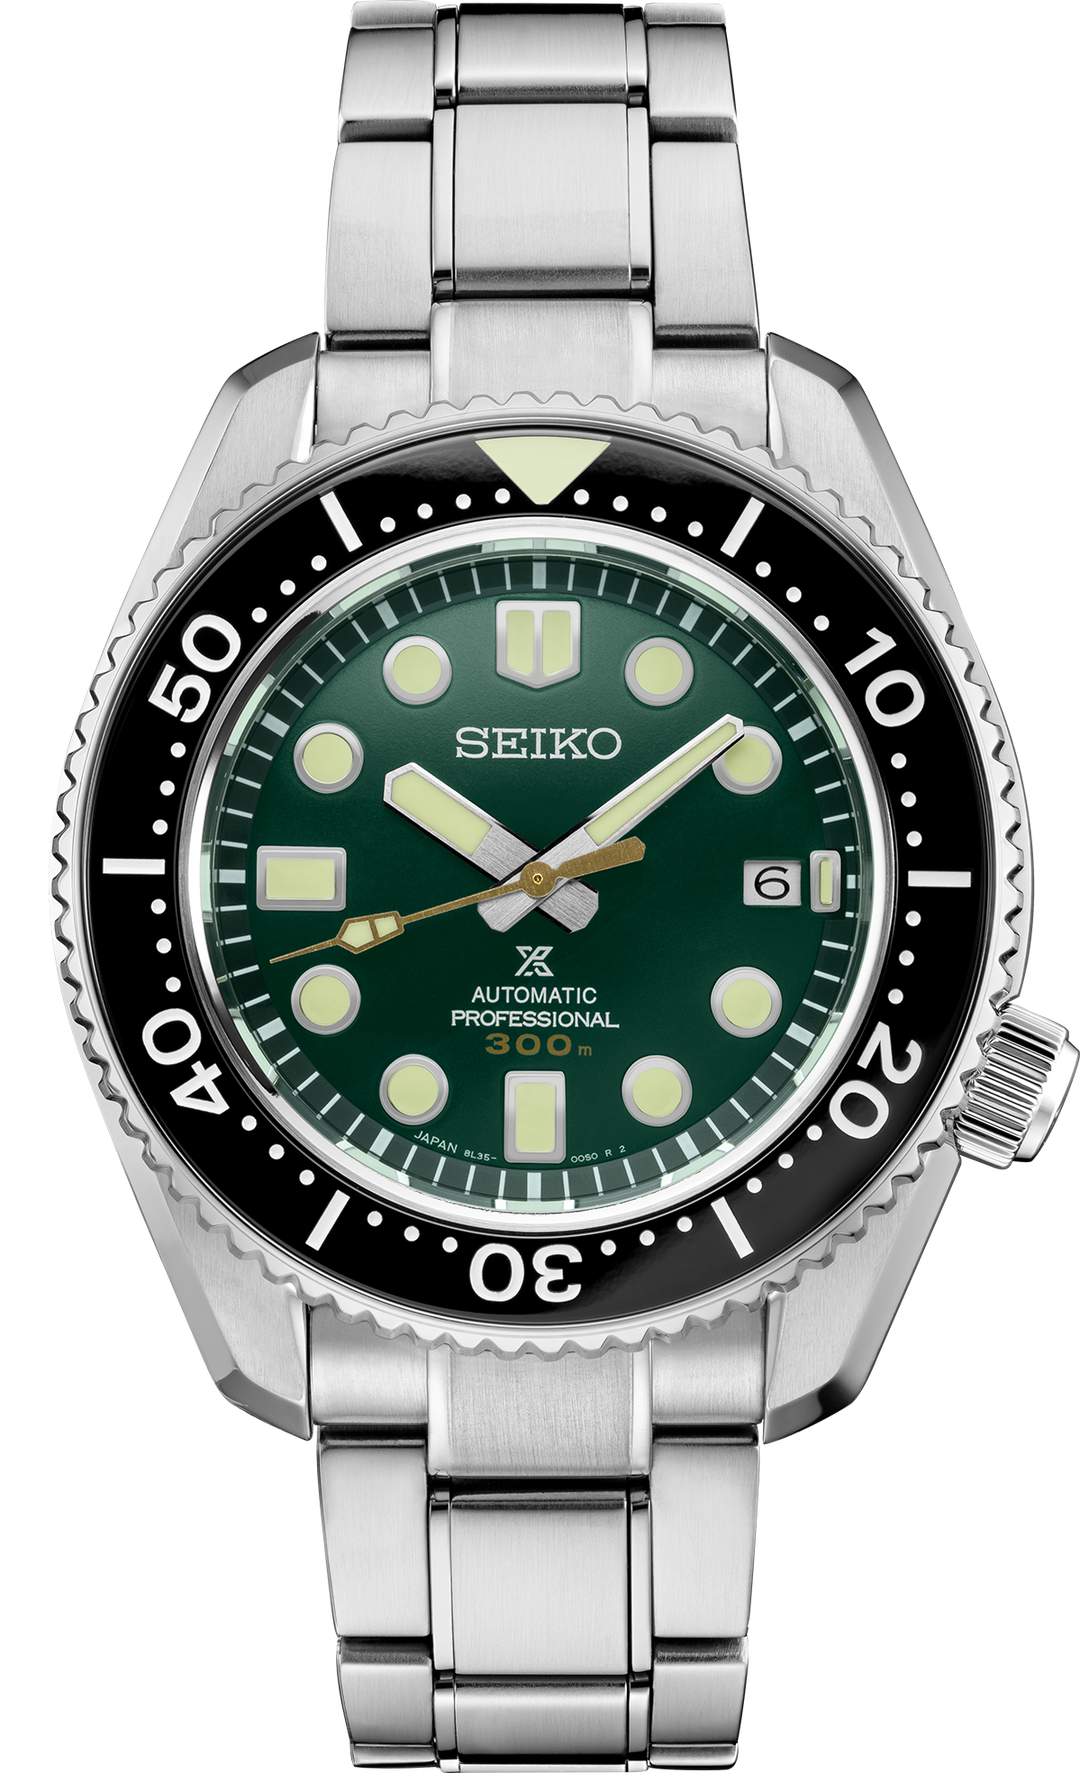 140TH ANNIVERSARY LIMITED EDITION SATURATION DIVER